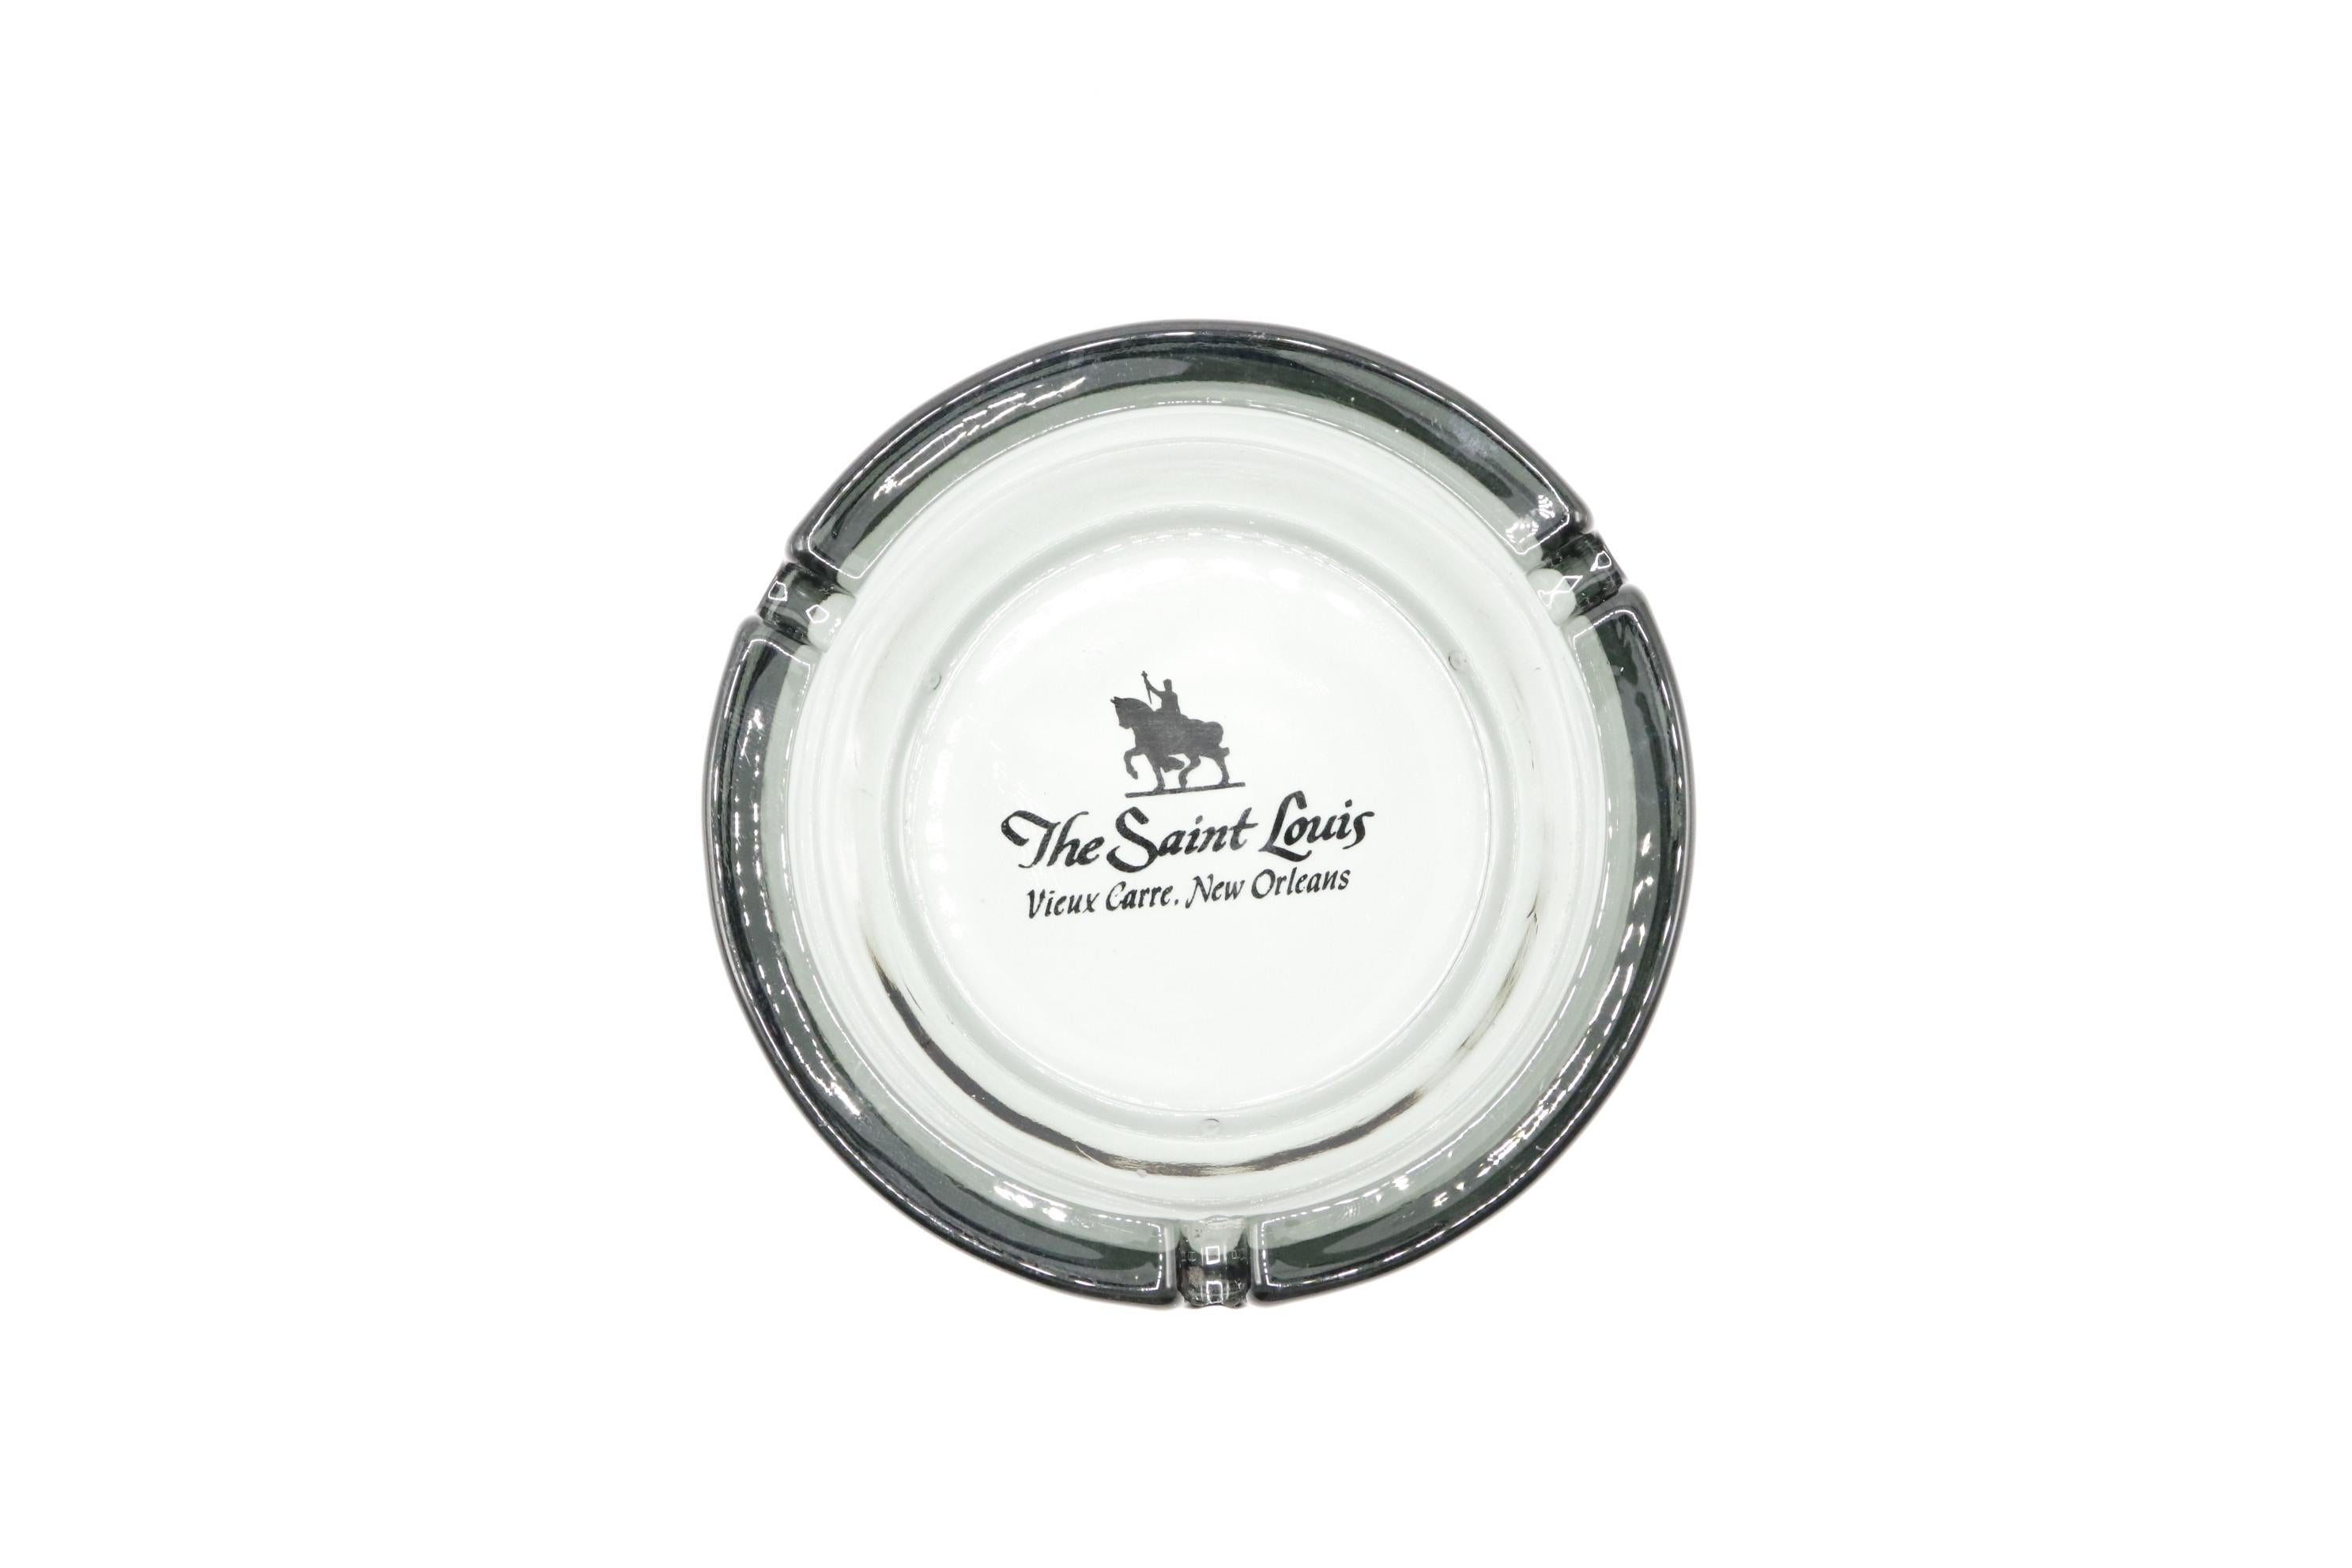 20th Century The Saint Louis Hotel of New Orleans Glass Ashtray For Sale